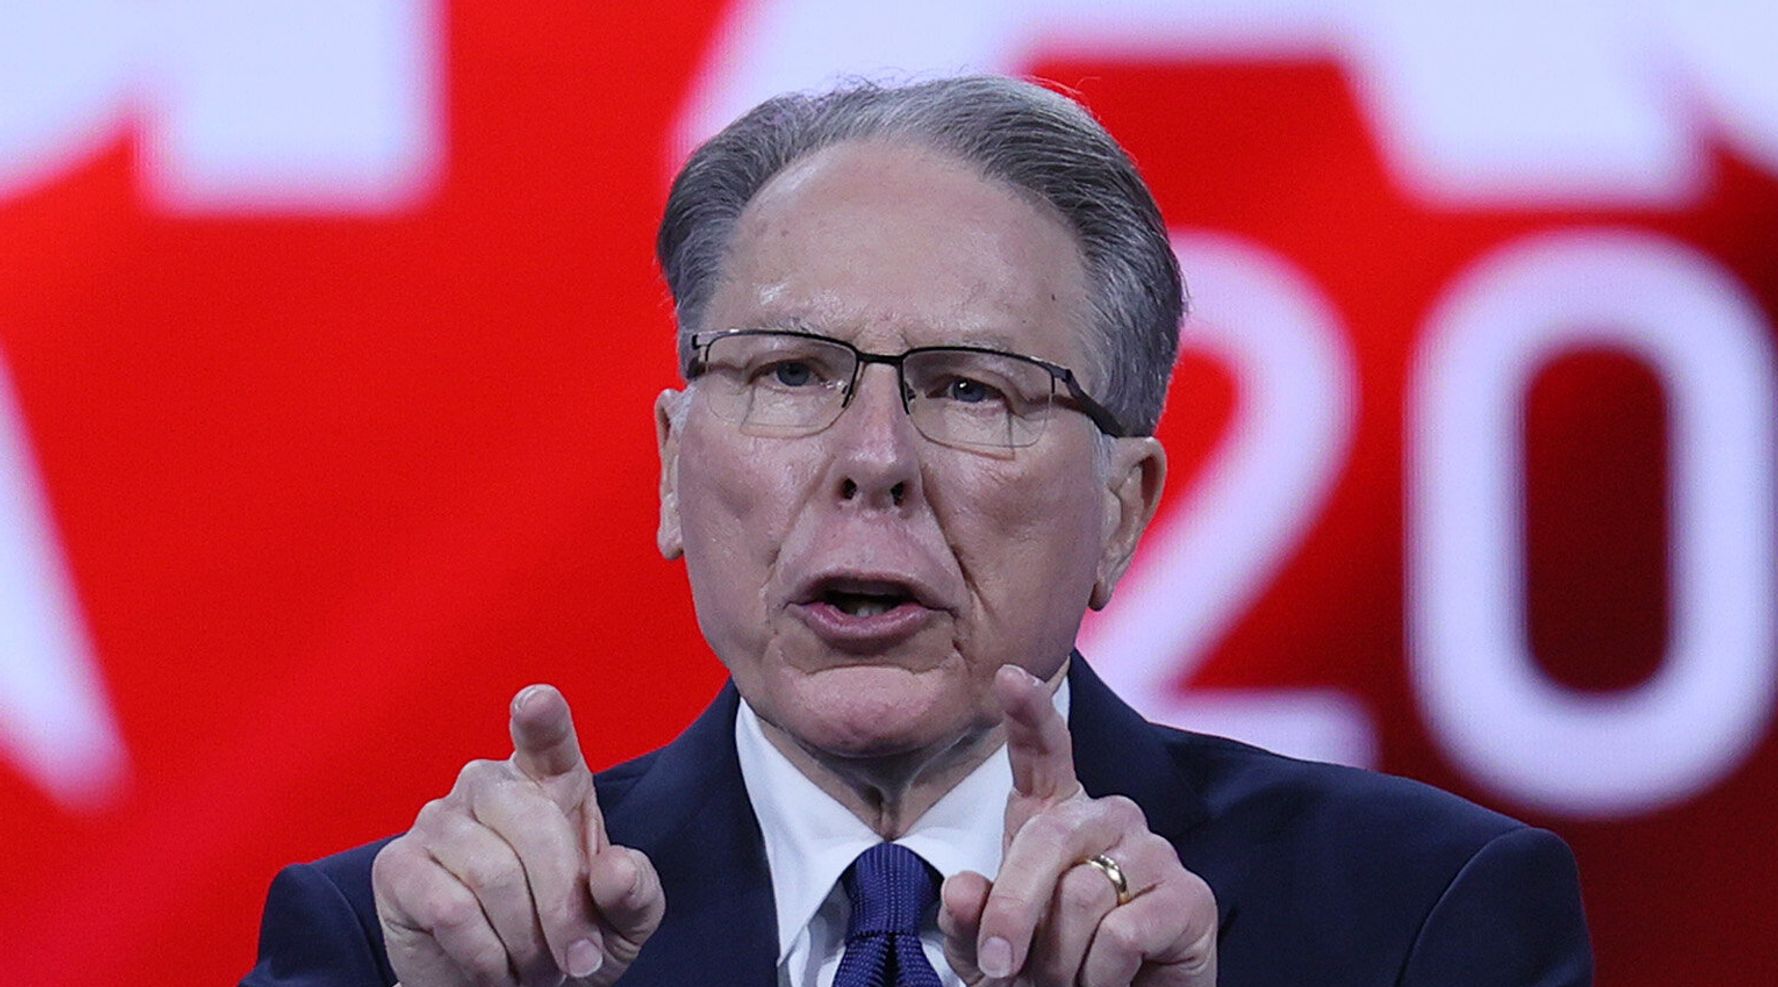 NRA Taunted On Twitter After Canceling Annual Meeting Over 'Safety' Issues